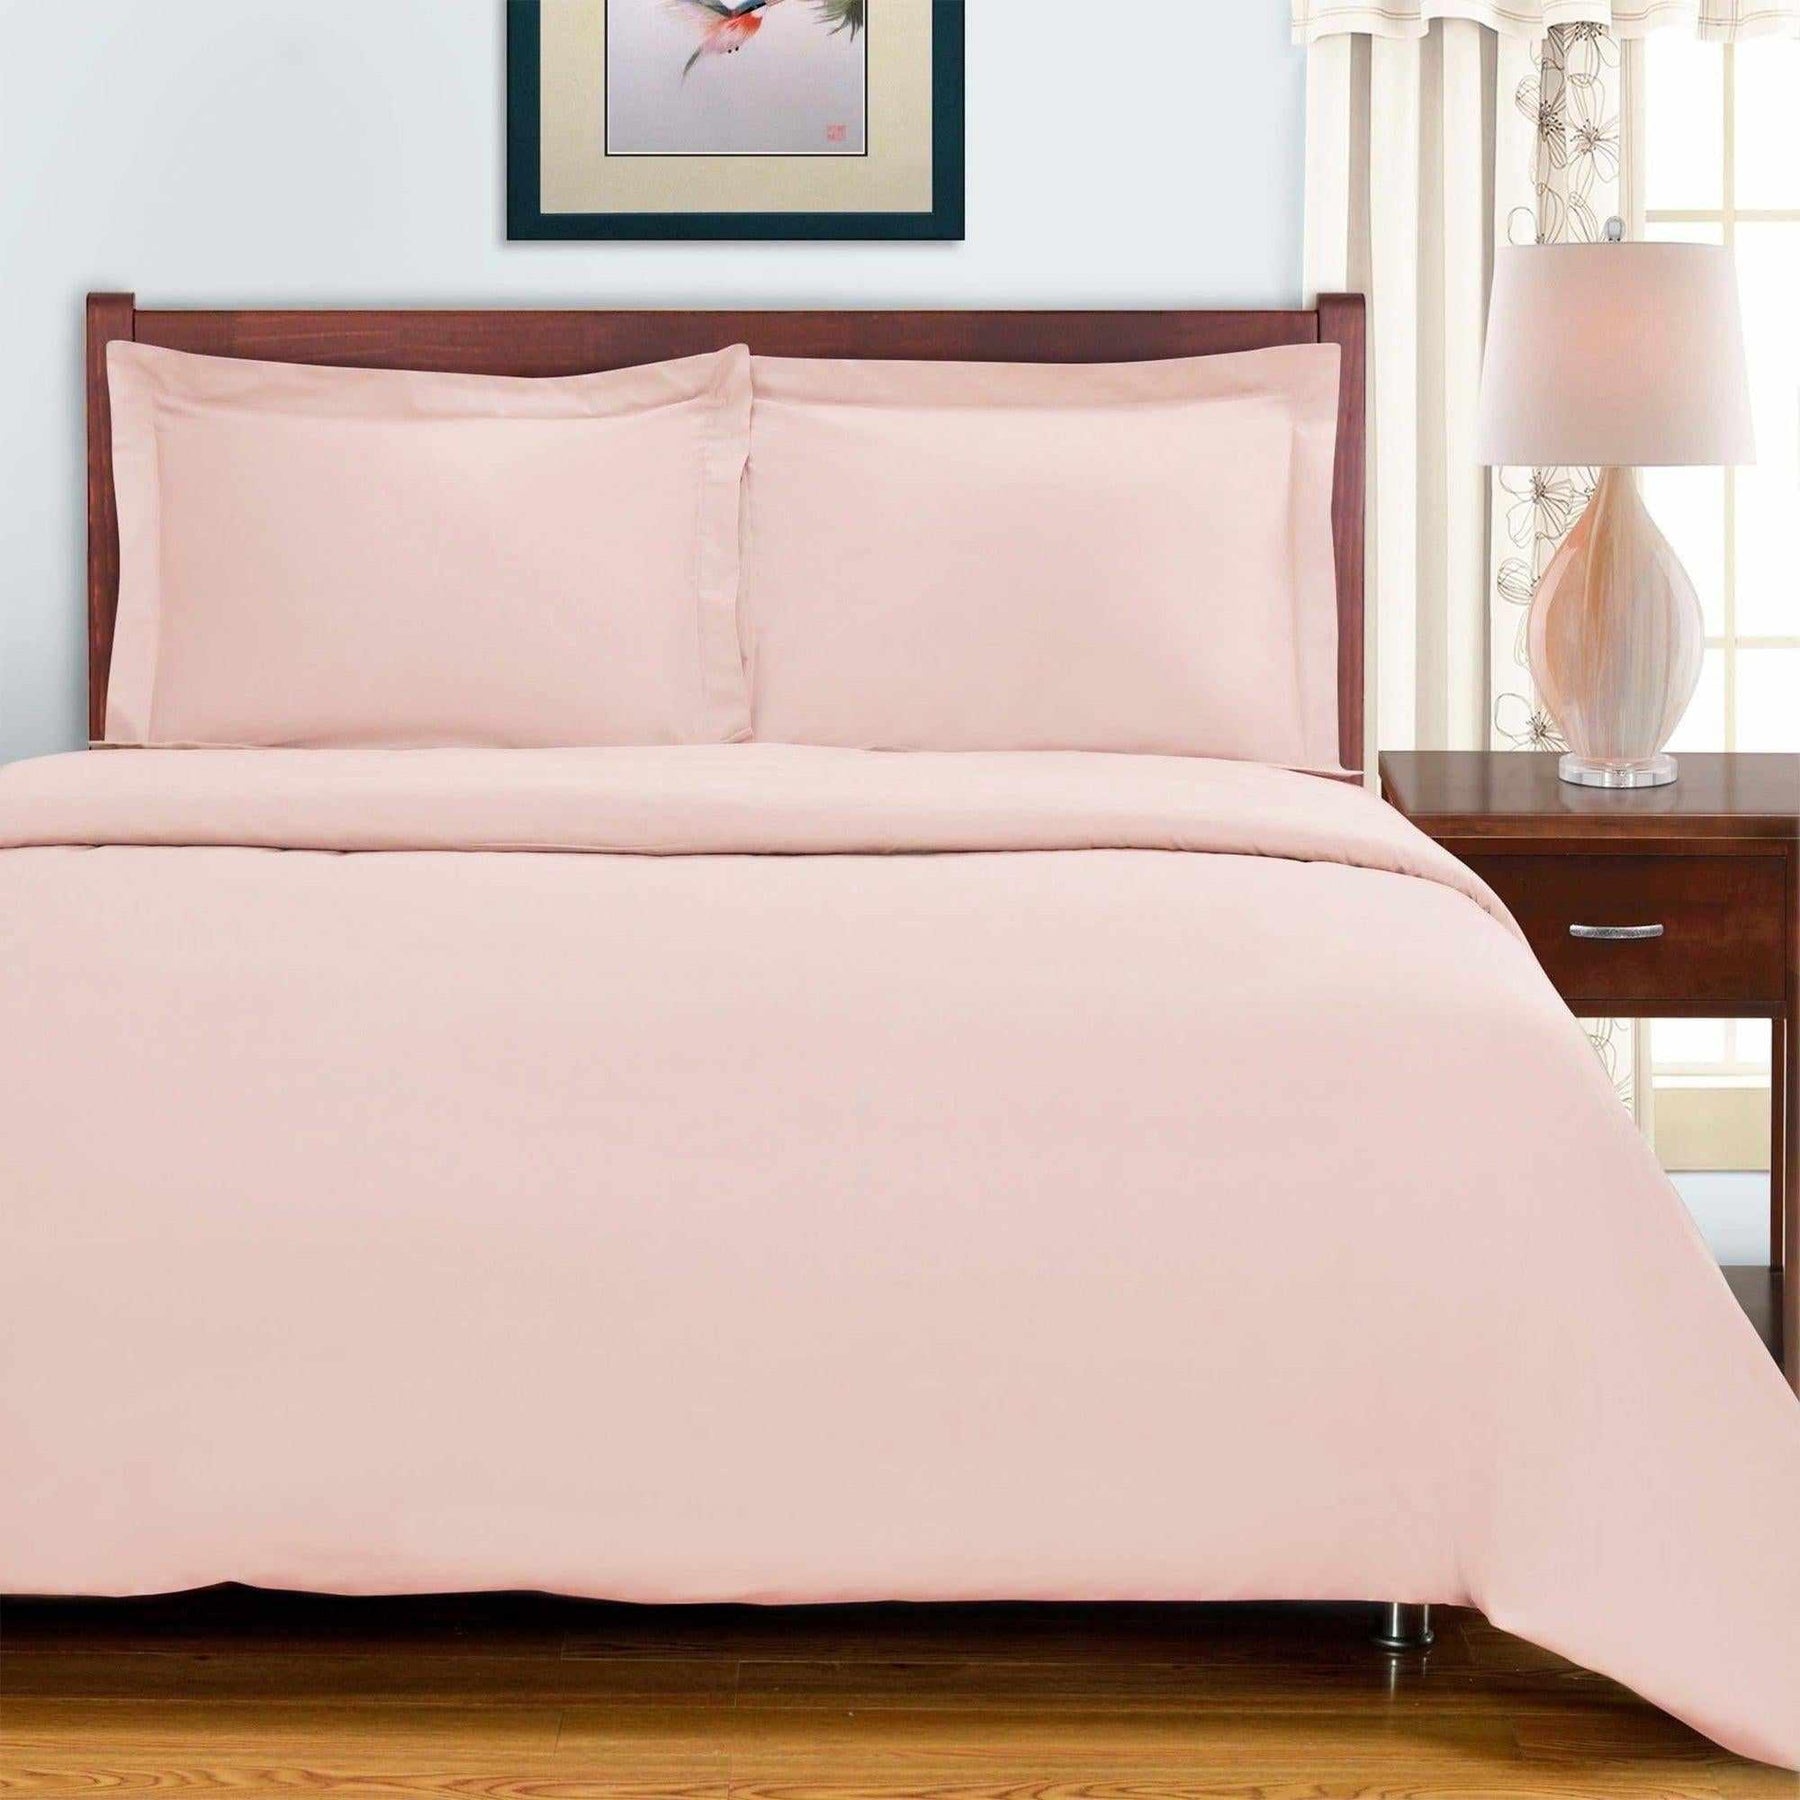  Superior Egyptian Cotton 700 Thread Count Breathable 3-Piece Duvet Cover Bedding Set - Pink